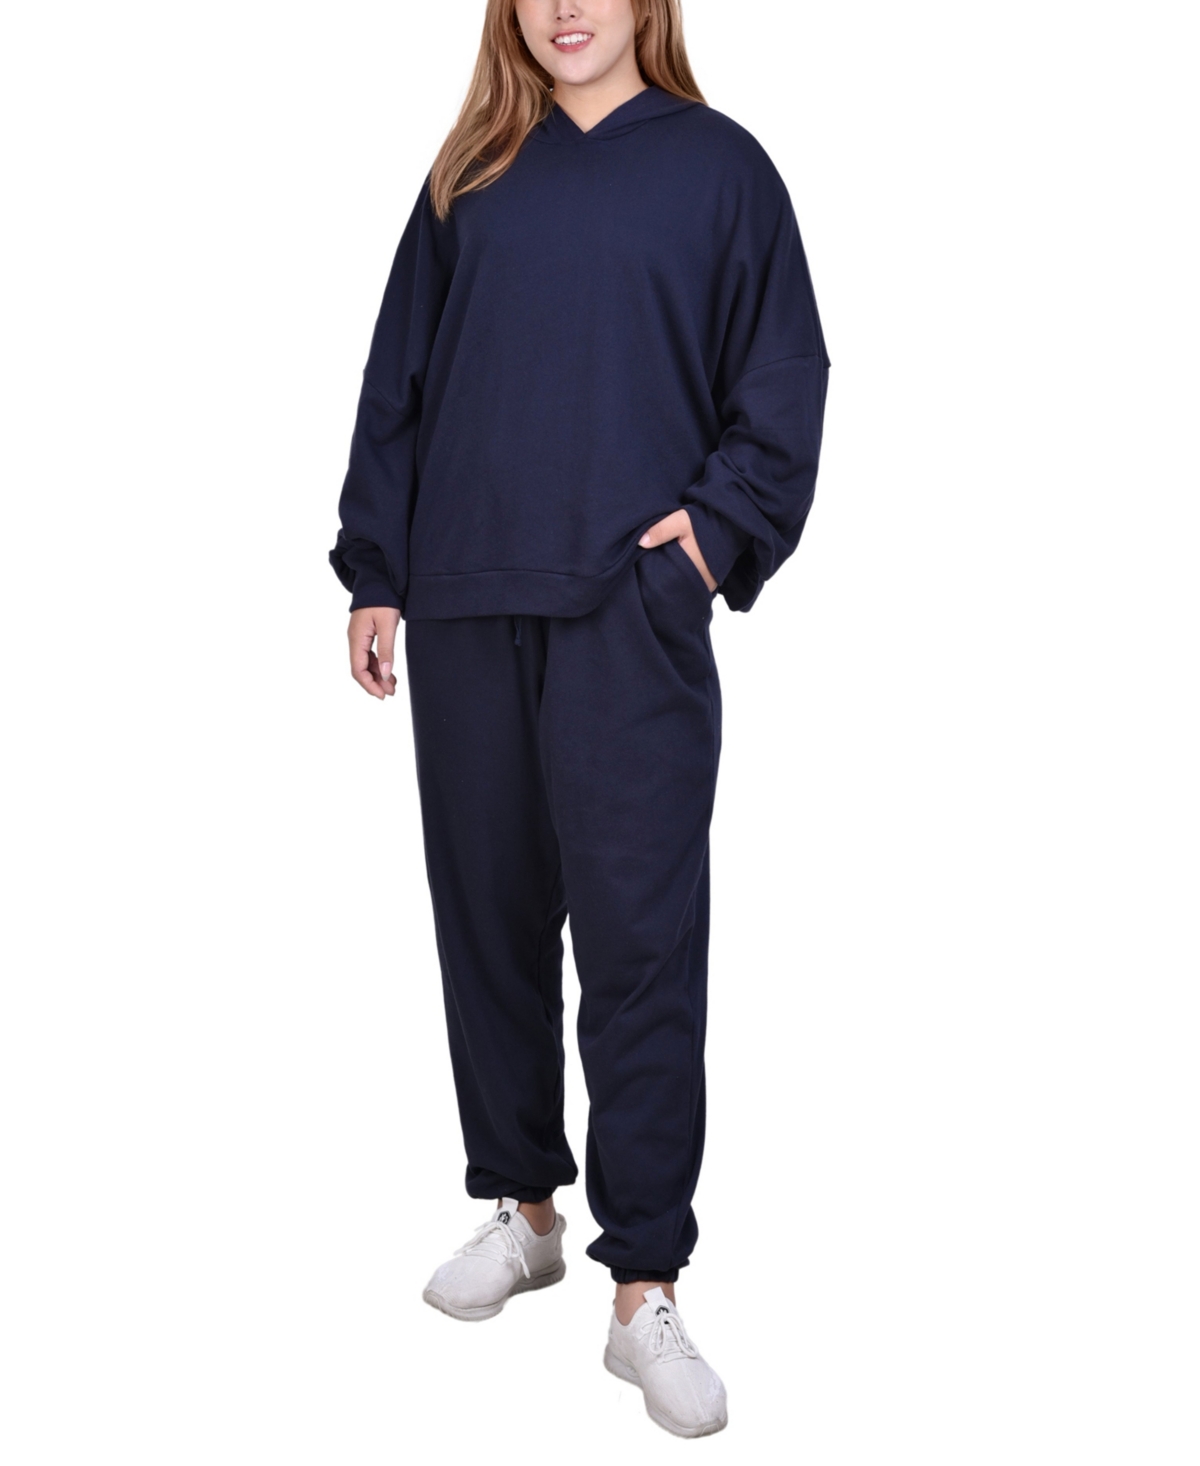 Shop Ny Collection Plus Size Long Sleeve Hooded Sweatshirt And Jogger Pants, 2 Piece Set In Navy